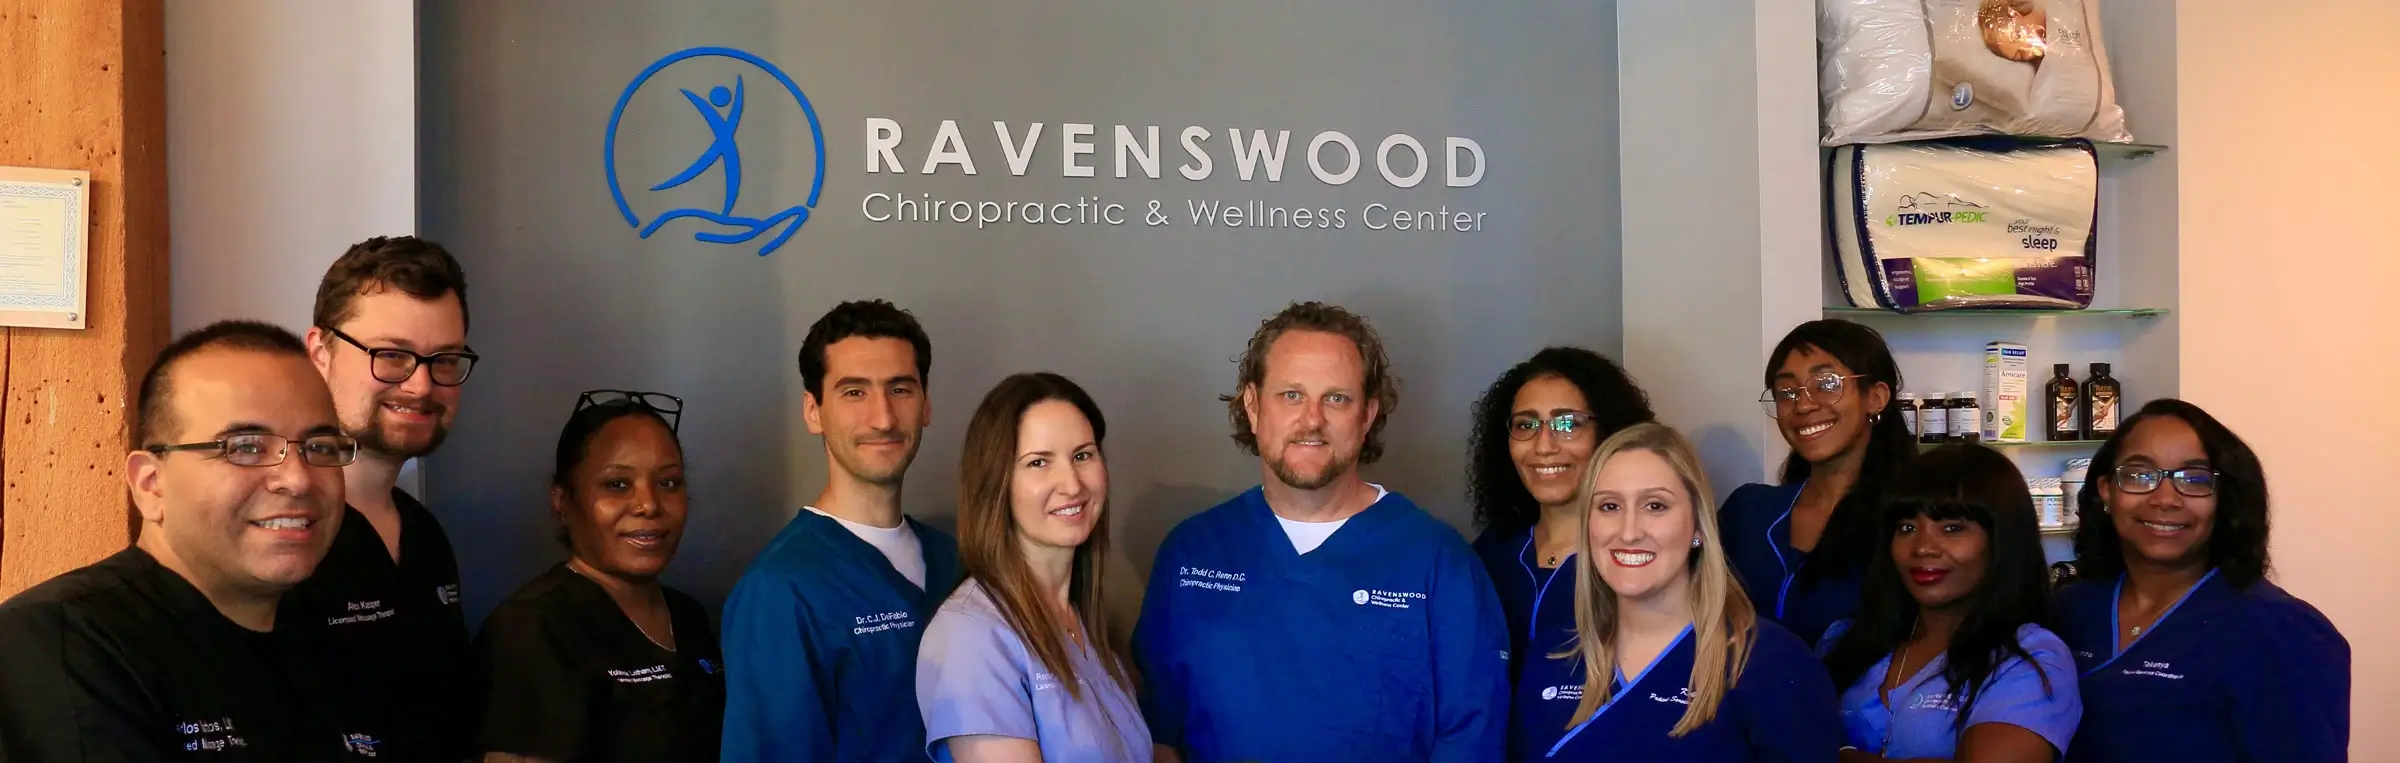 The team at Ravenswood Chiropractic in Chicago pose for a photo in the front office at our location in Chicago, Il. Taken in 2022.